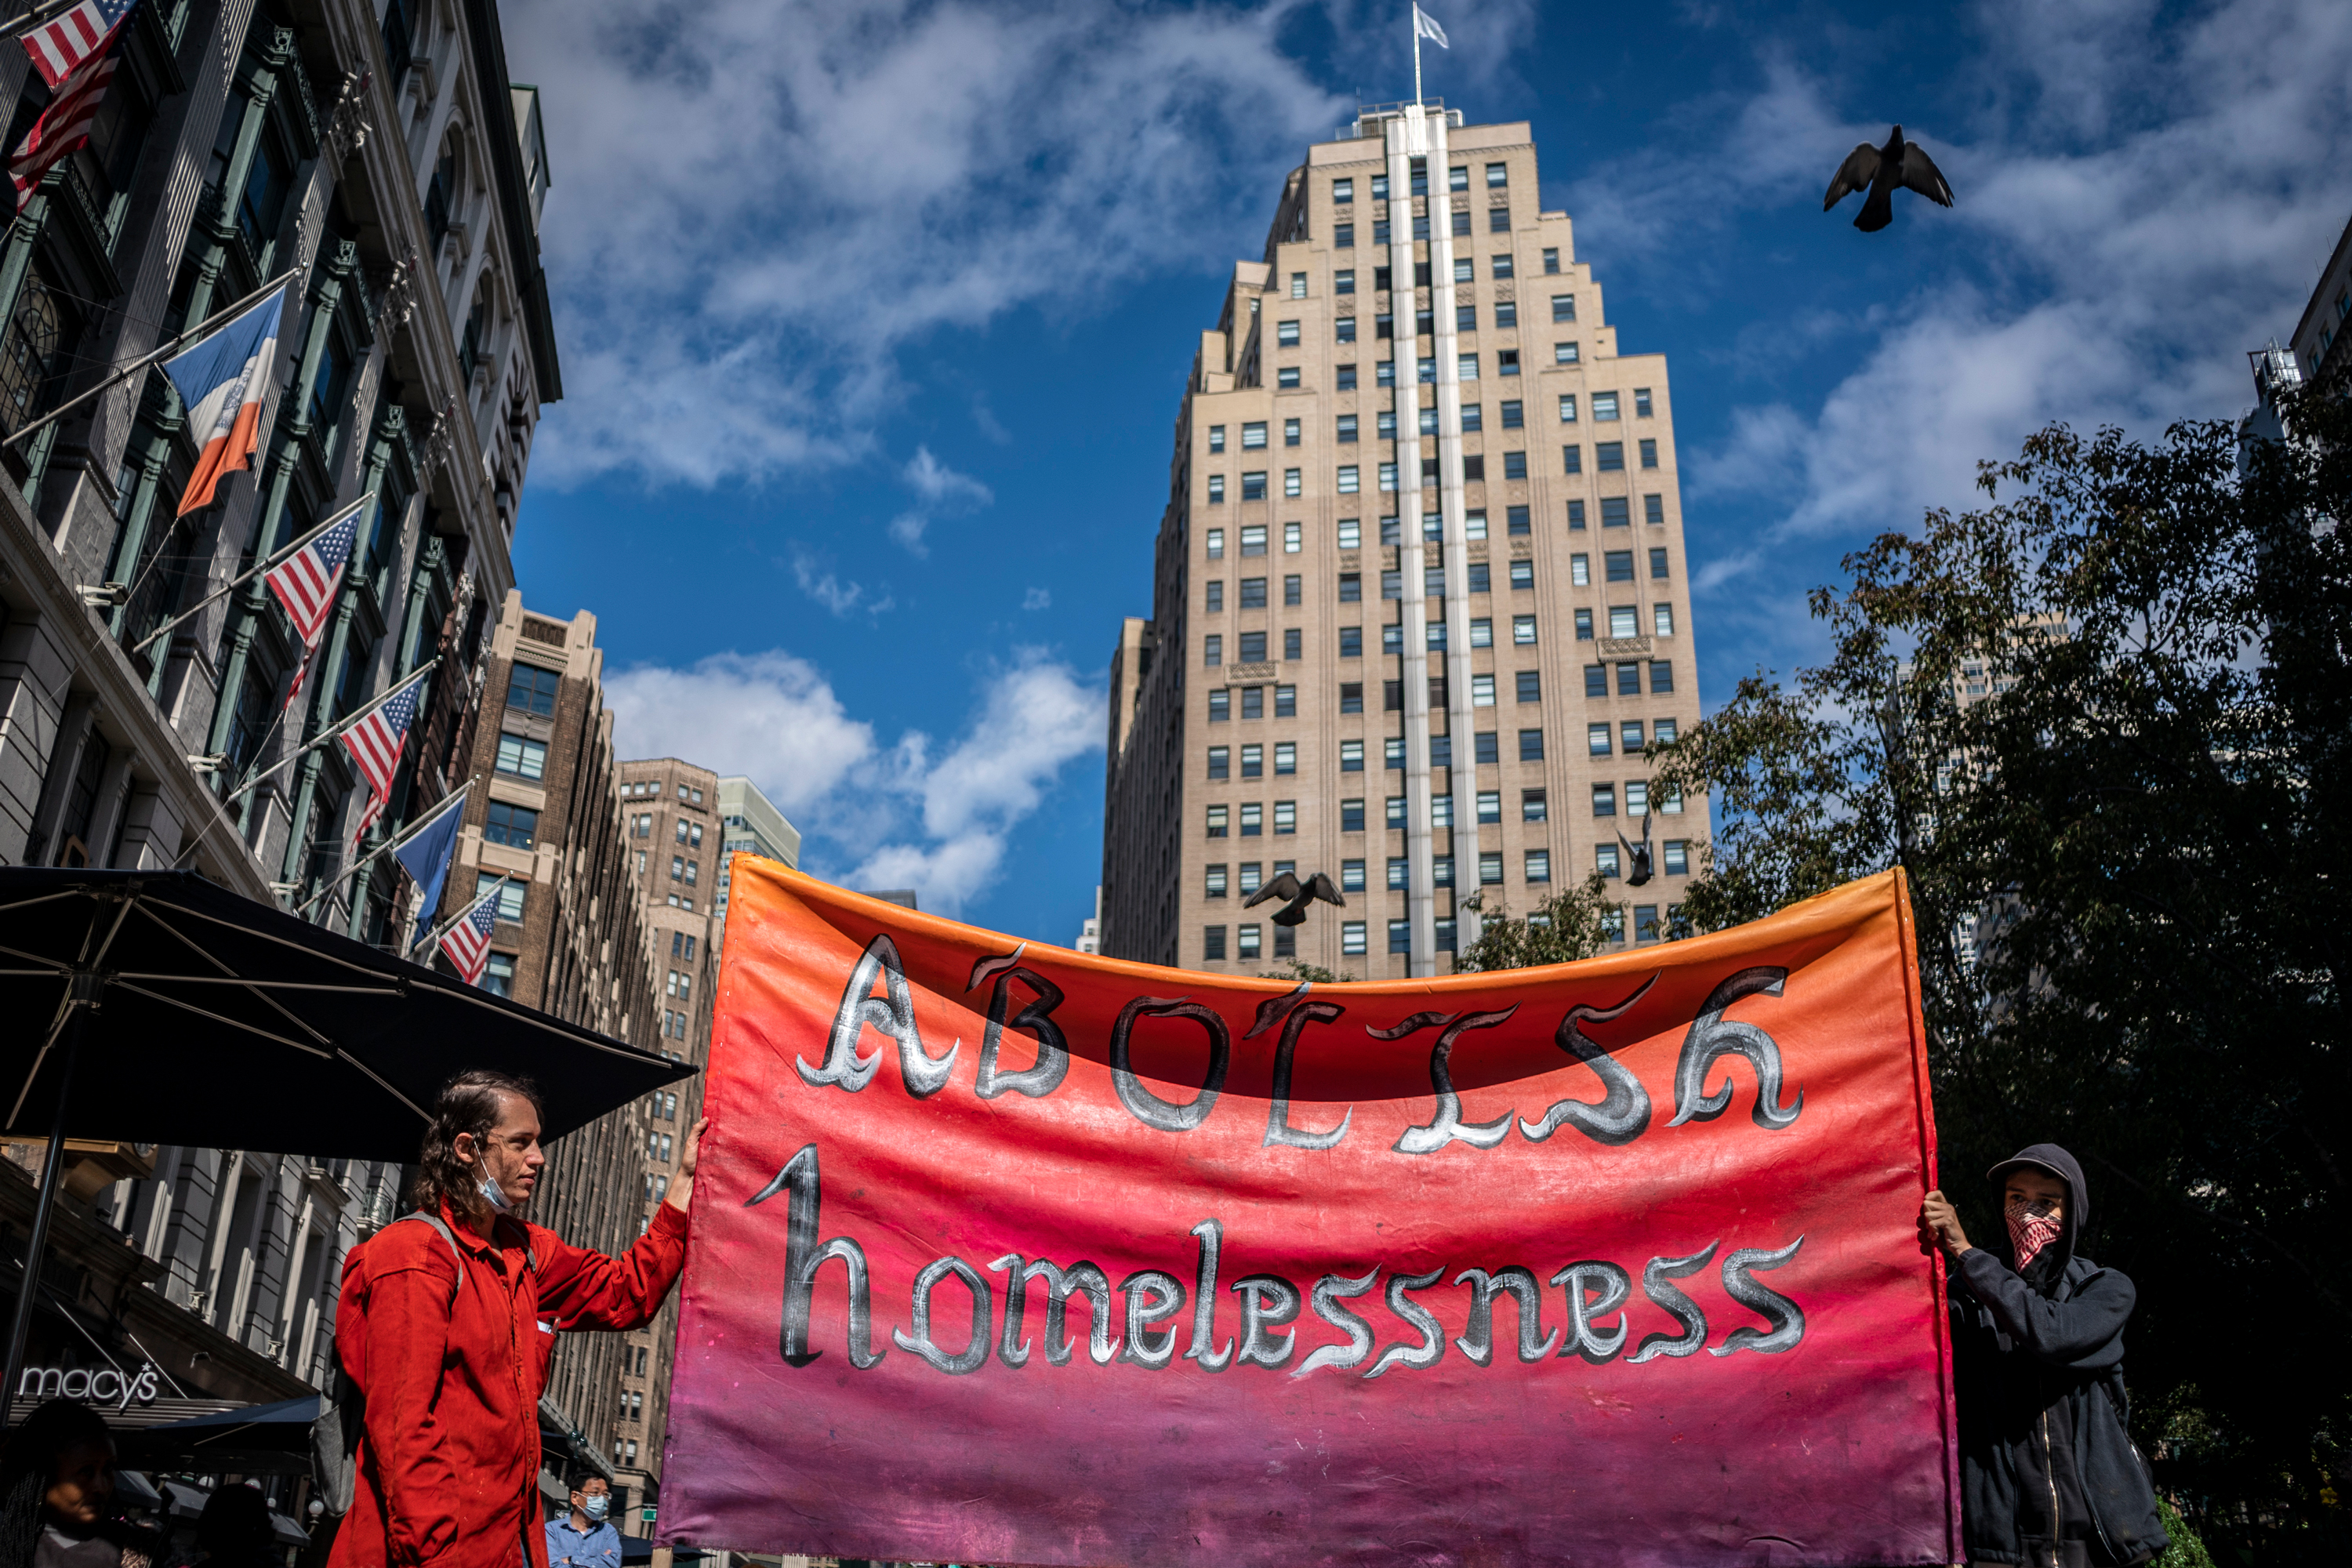 Advocates draw attention in Herald Square to increased struggles for homeless people during the coronavirus outbreak, Oct. 2, 2020.